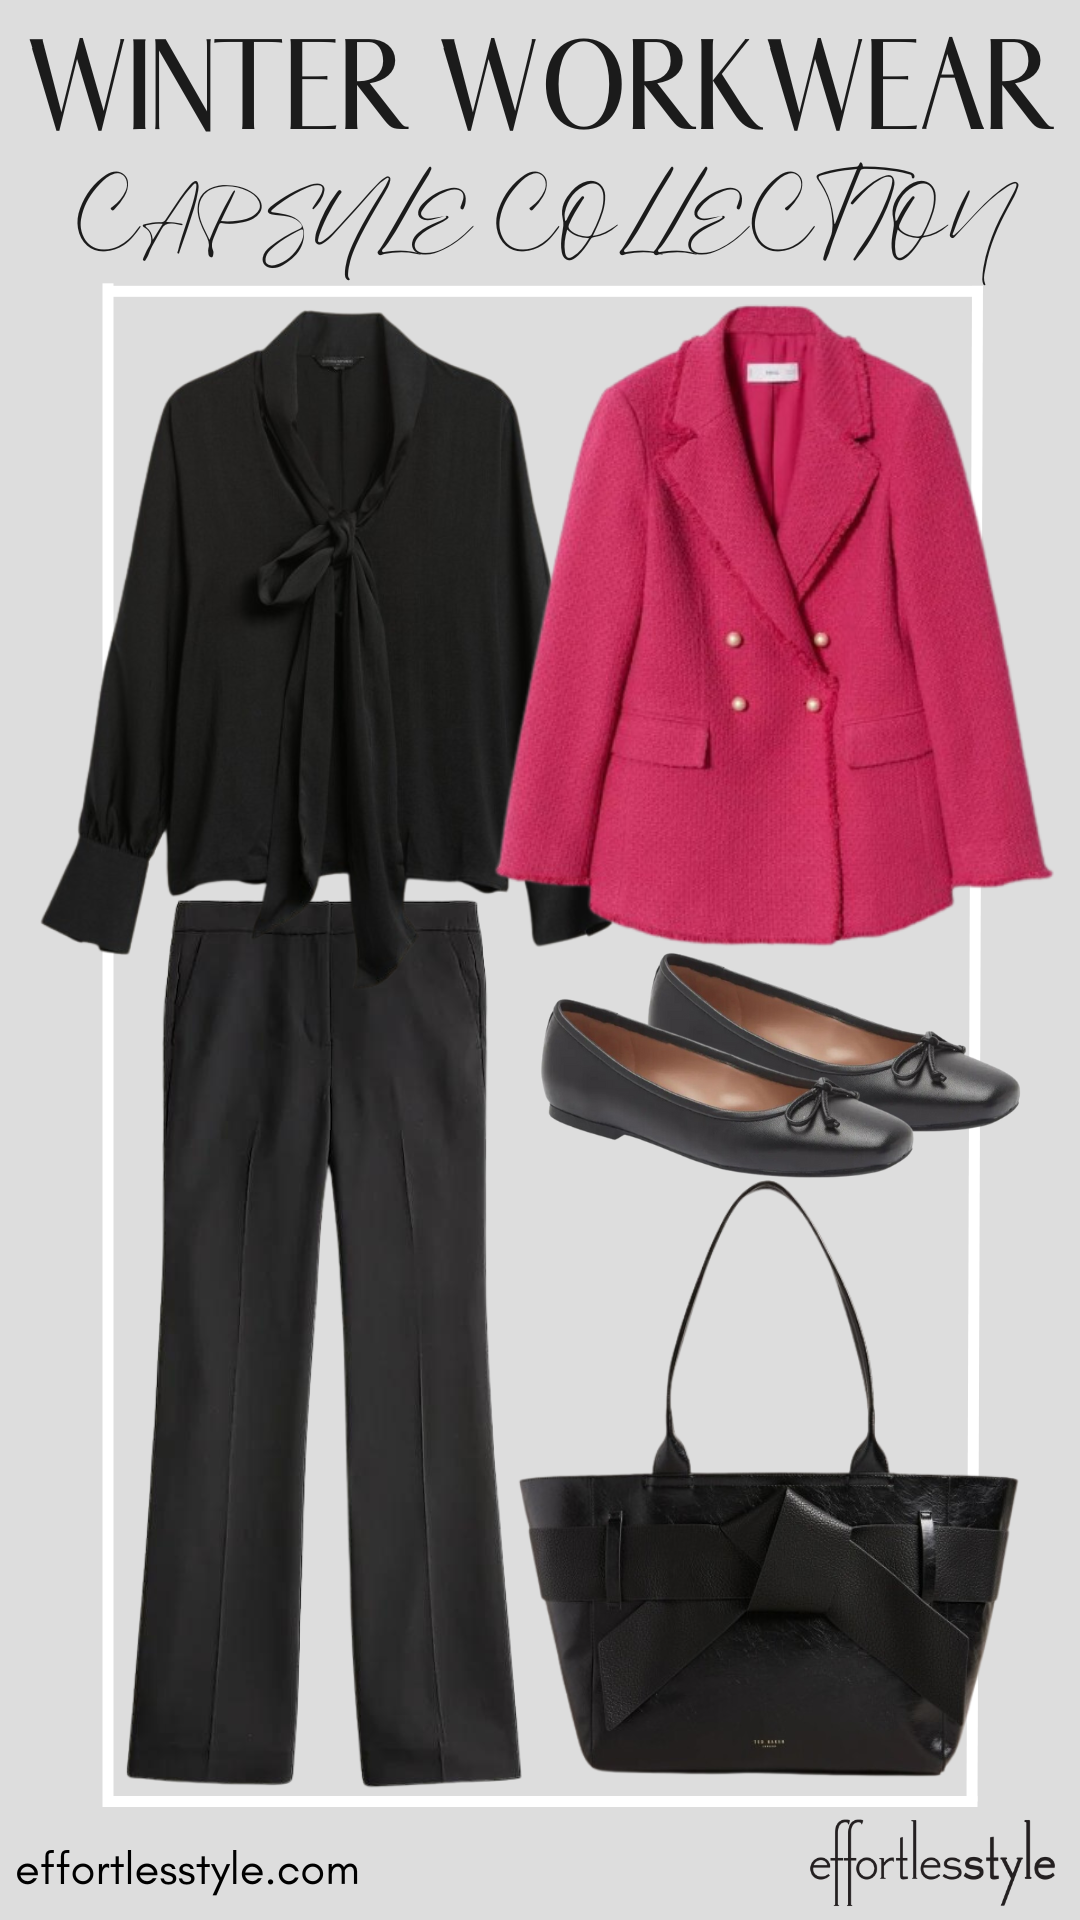 How To Wear Our Winter Workwear Capsule Wardrobe - Part 1 Bow Neck Blouse & Black Pants & Statement Blazer how to wear all black with a pop of color to the office how to wear bight pink to work how to style pink in the winter how to wear flats with suit pants